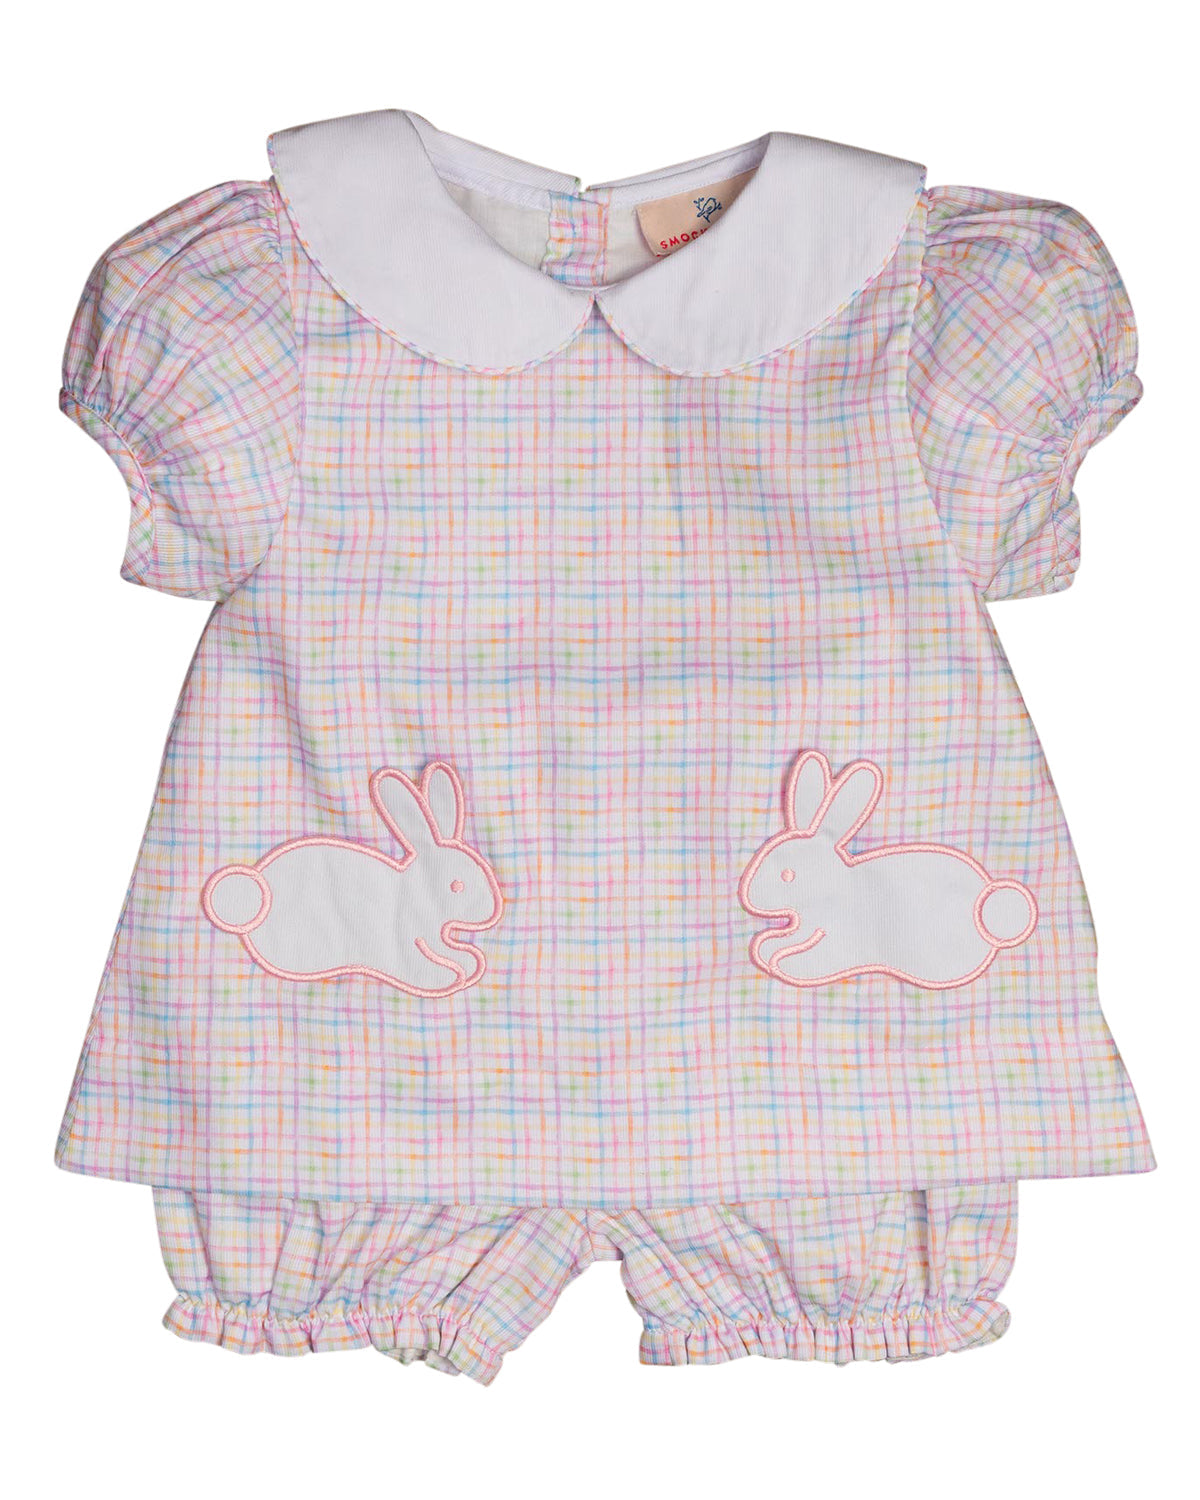 Pink Rainbow Plaid Bloomer Set with Bunny Pockets